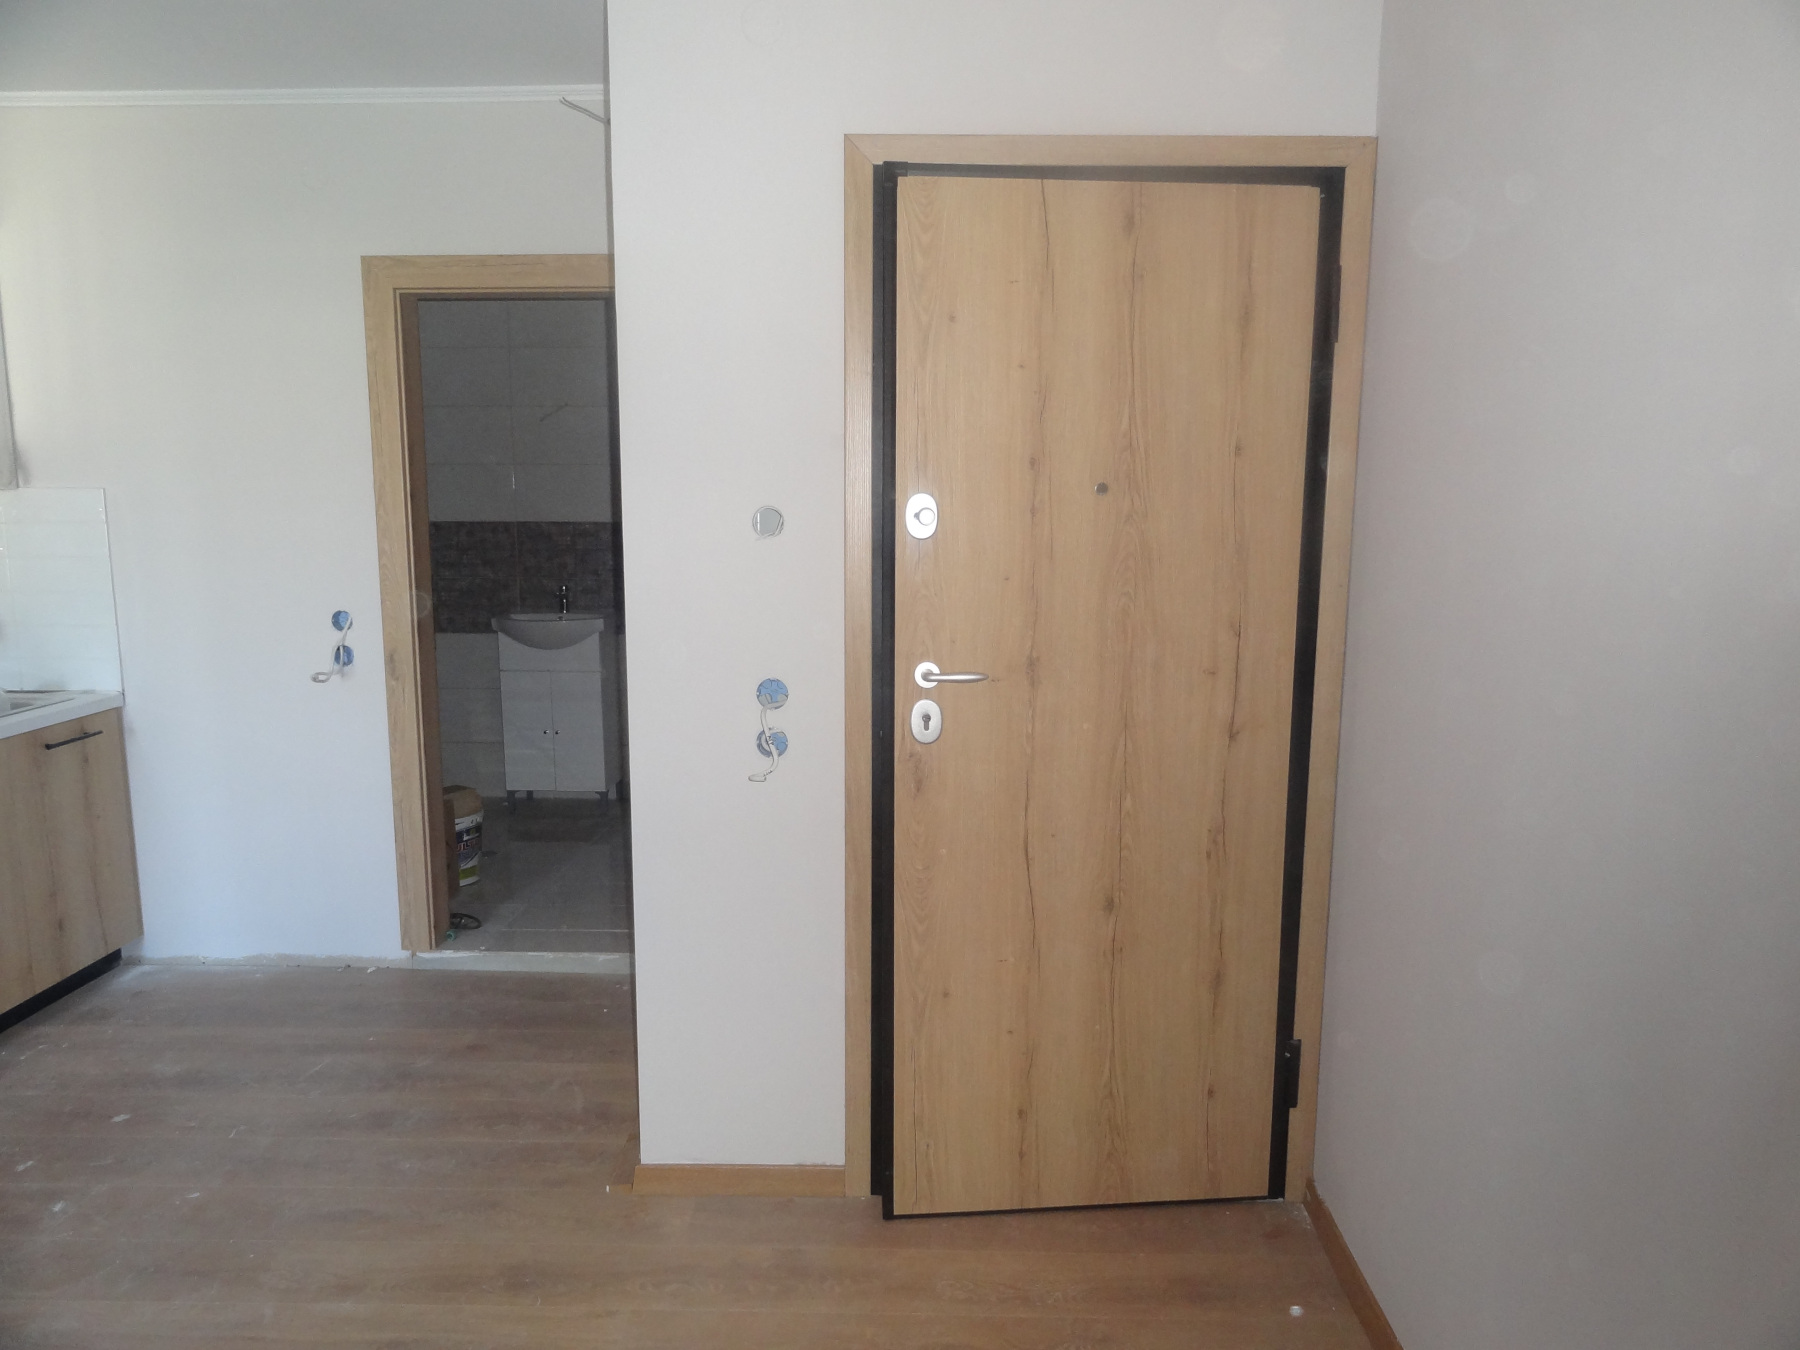 Newly built 1 bedroom apartment for rent, 48 sq.m. 2nd floor in a central part of Anatoli Ioannina